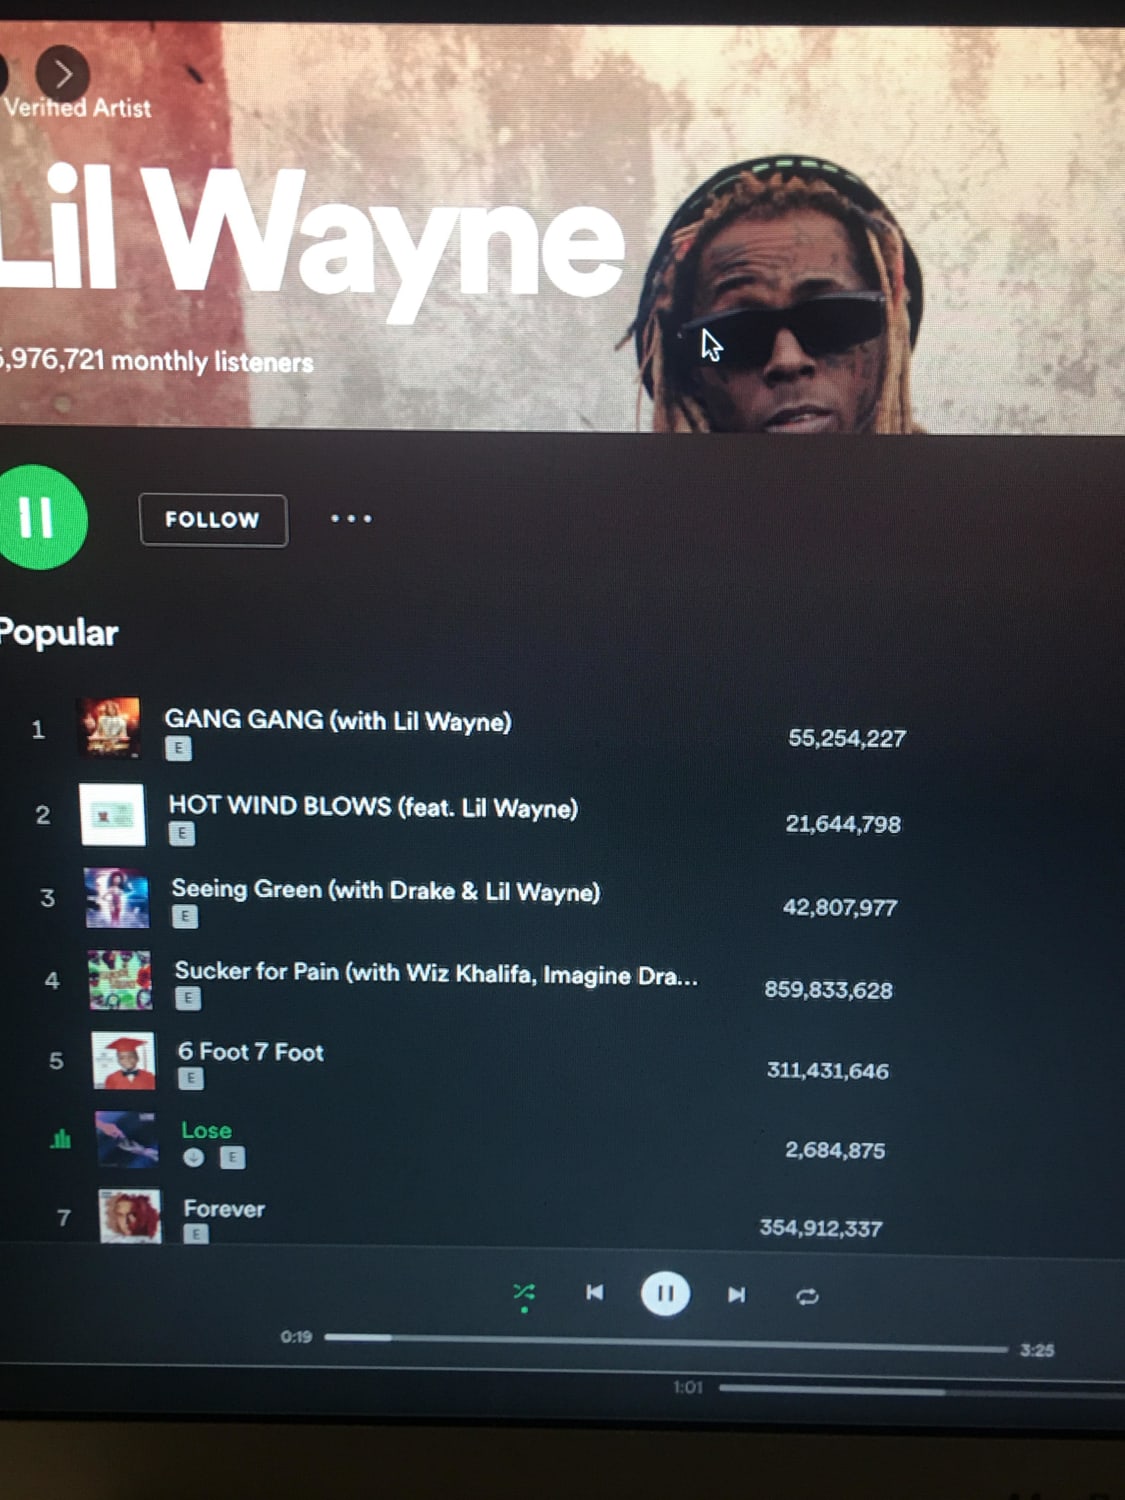 Lose is now Lil Wayne’s top 6 song!